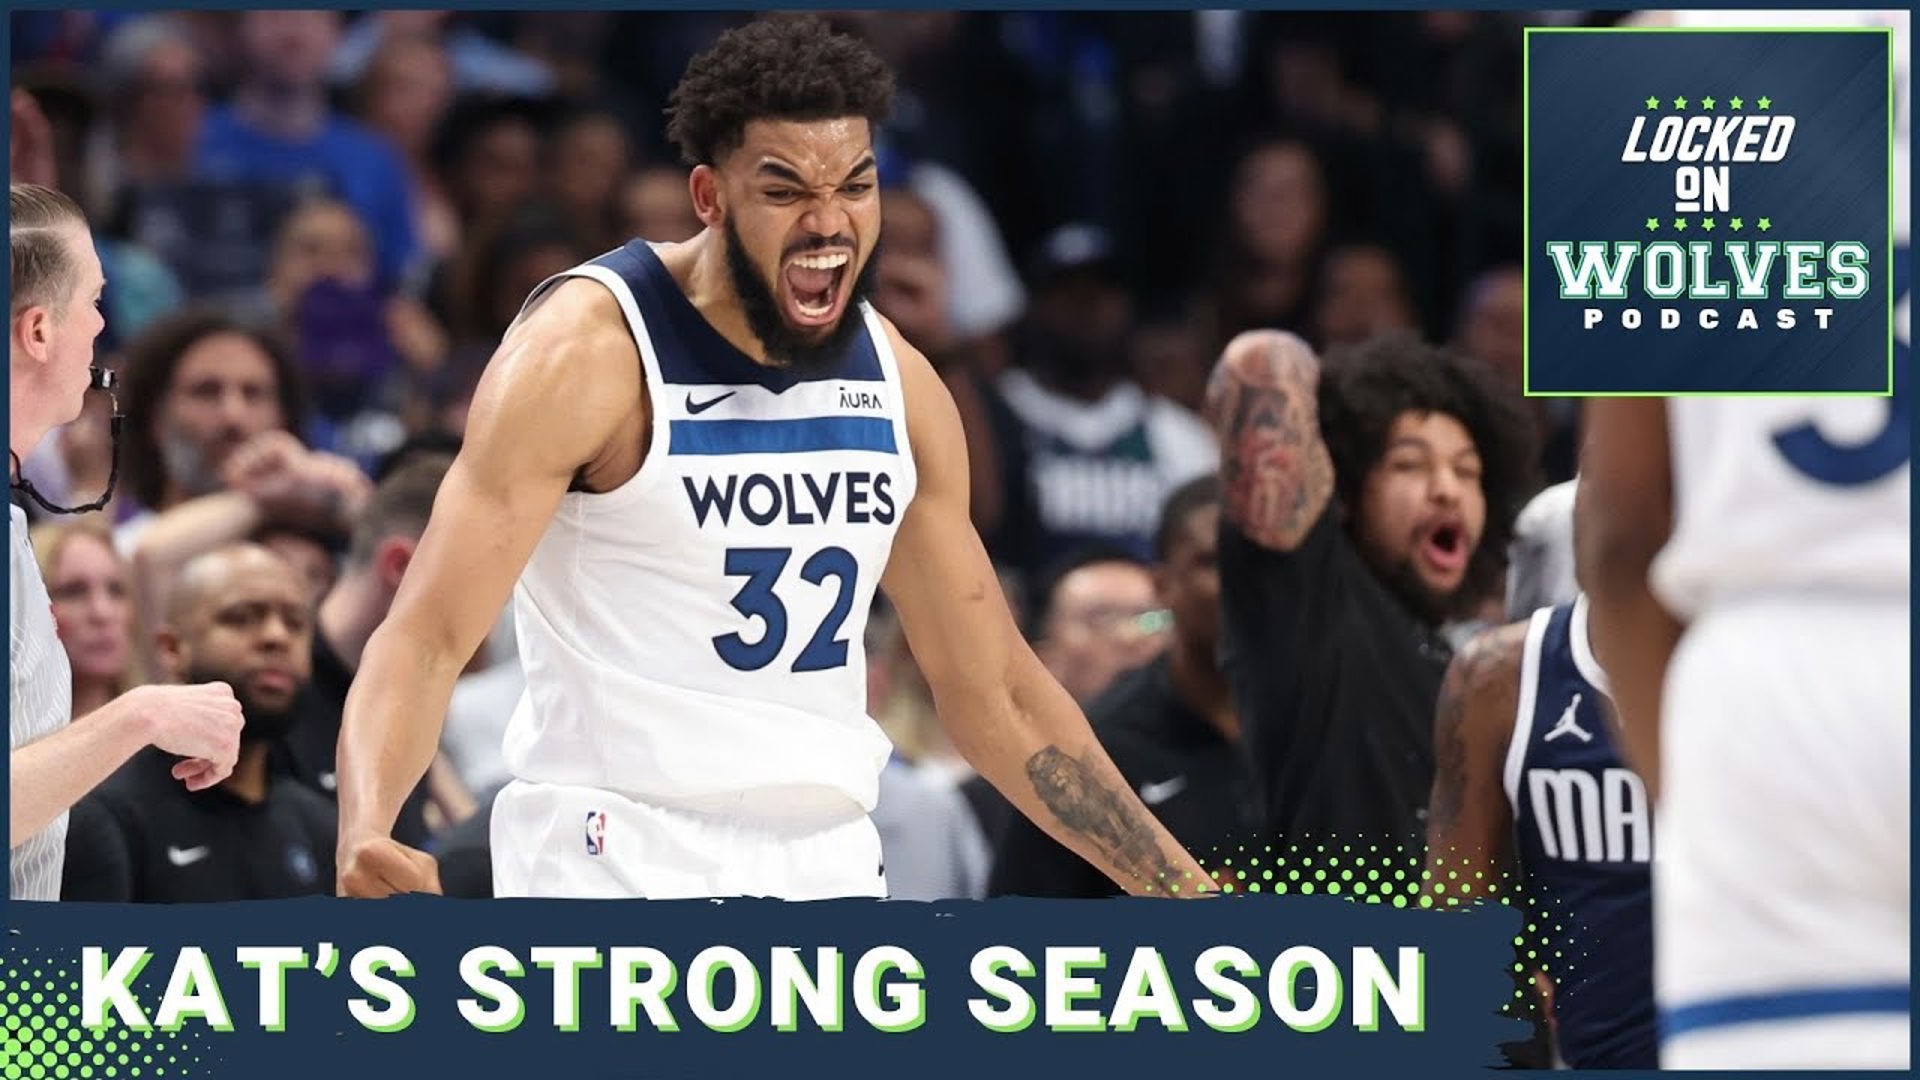 Karl-Anthony Towns turned in another strong season for the Minnesota Timberwolves